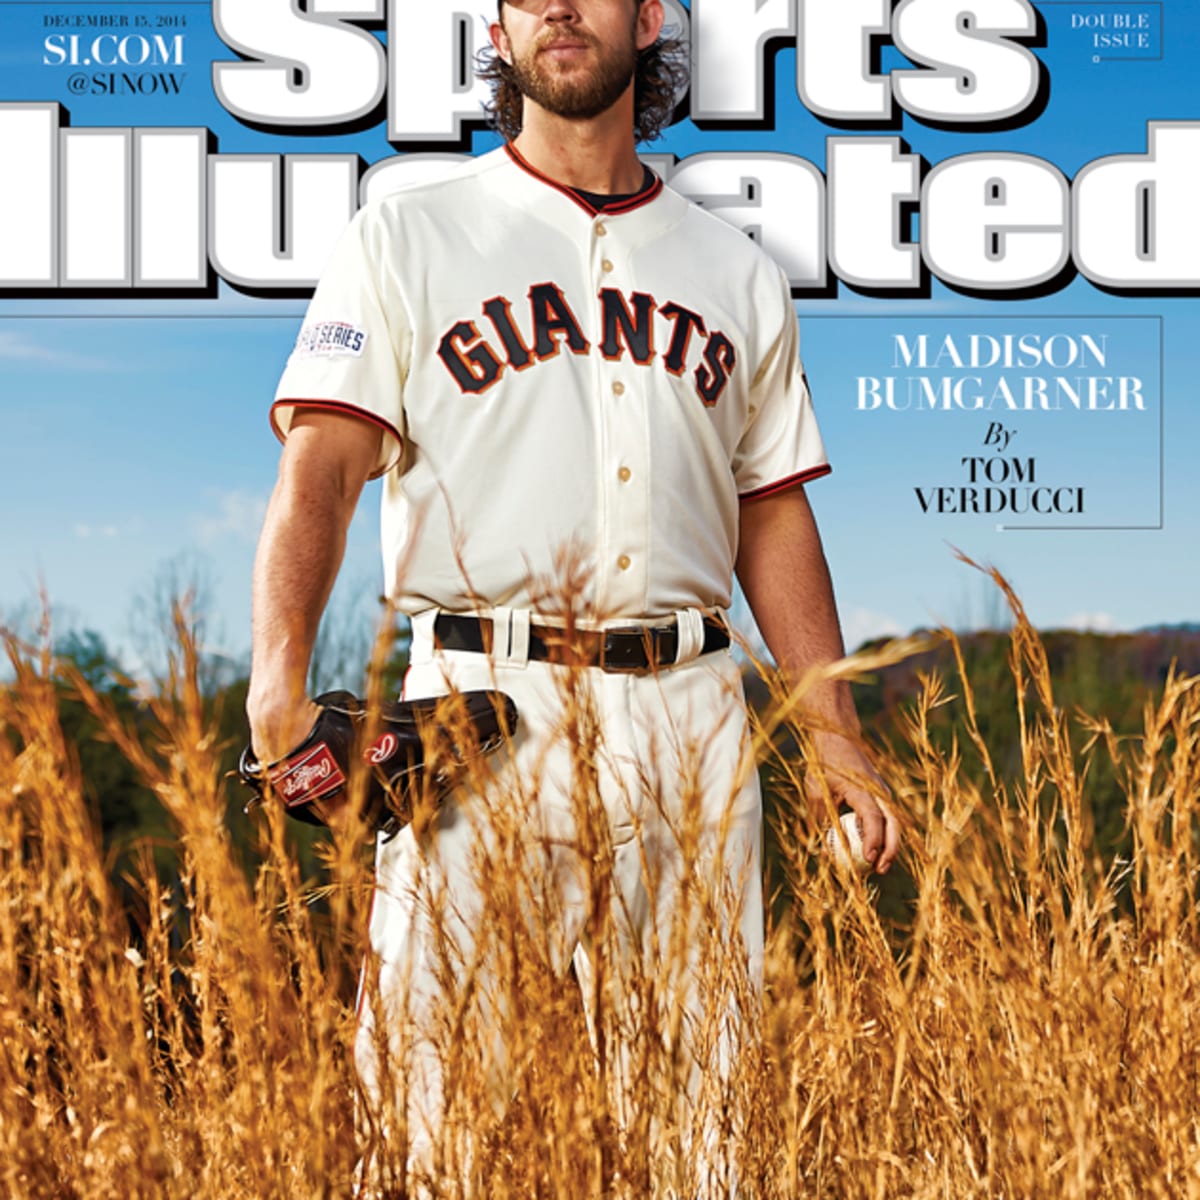 Madison Bumgarner welcomed warmly by Giants fans